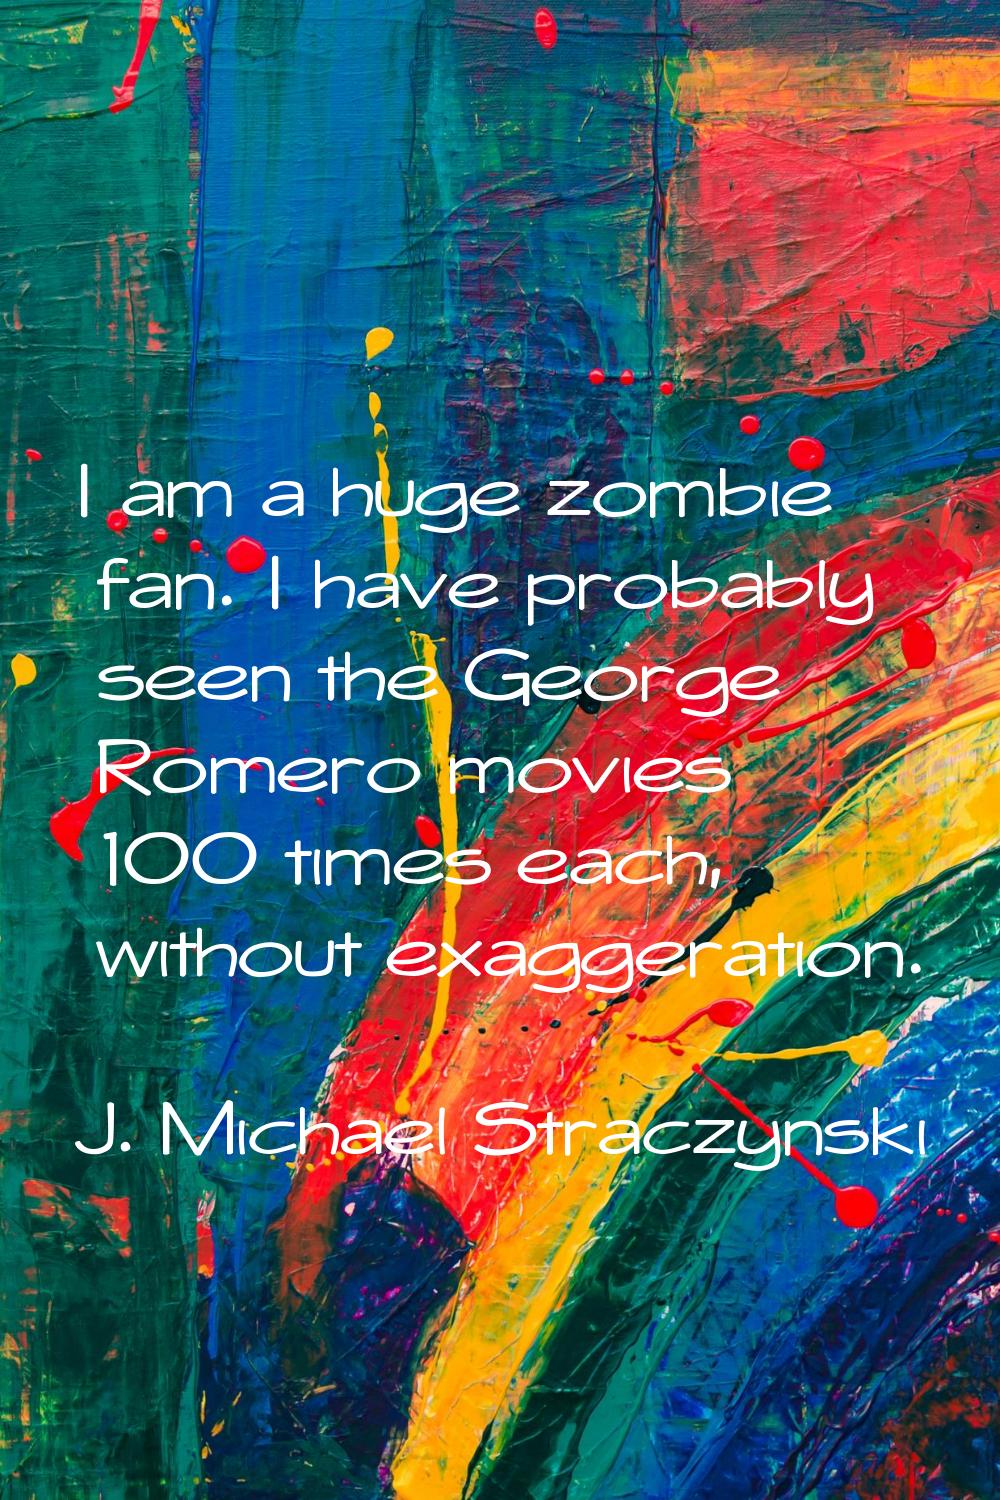 I am a huge zombie fan. I have probably seen the George Romero movies 100 times each, without exagg